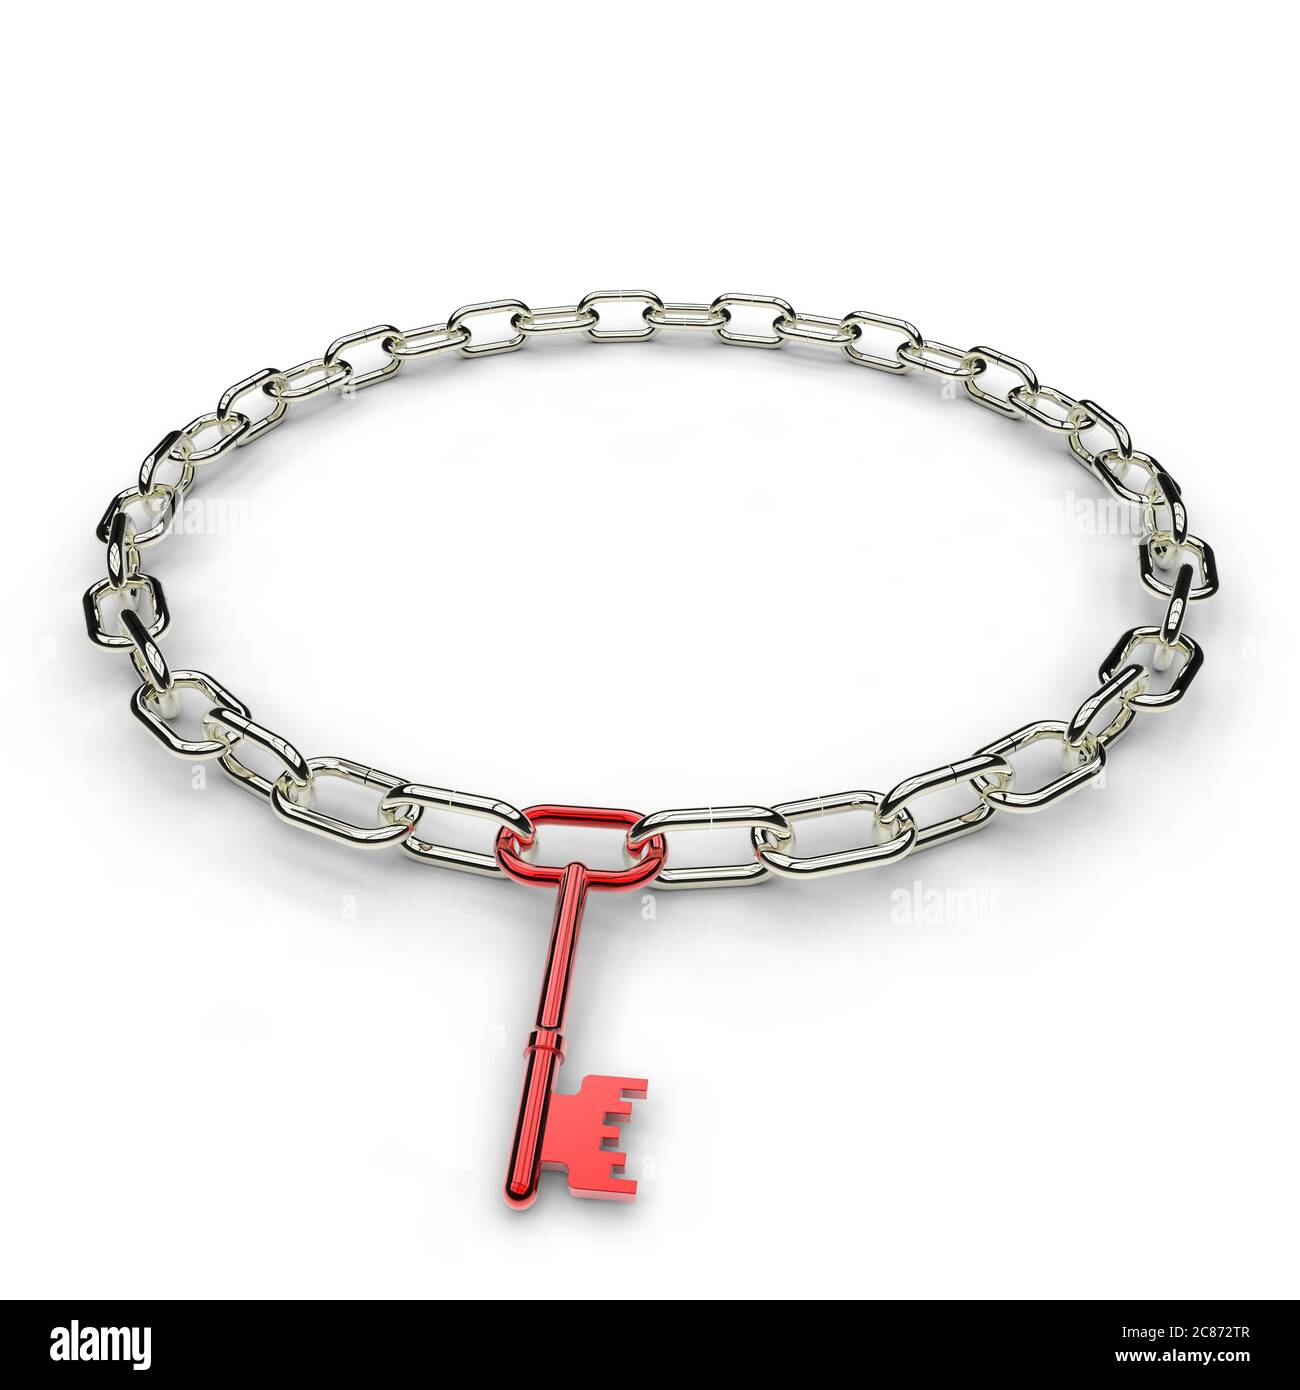 Red key link in a silver circular chain on a white background Stock Photo